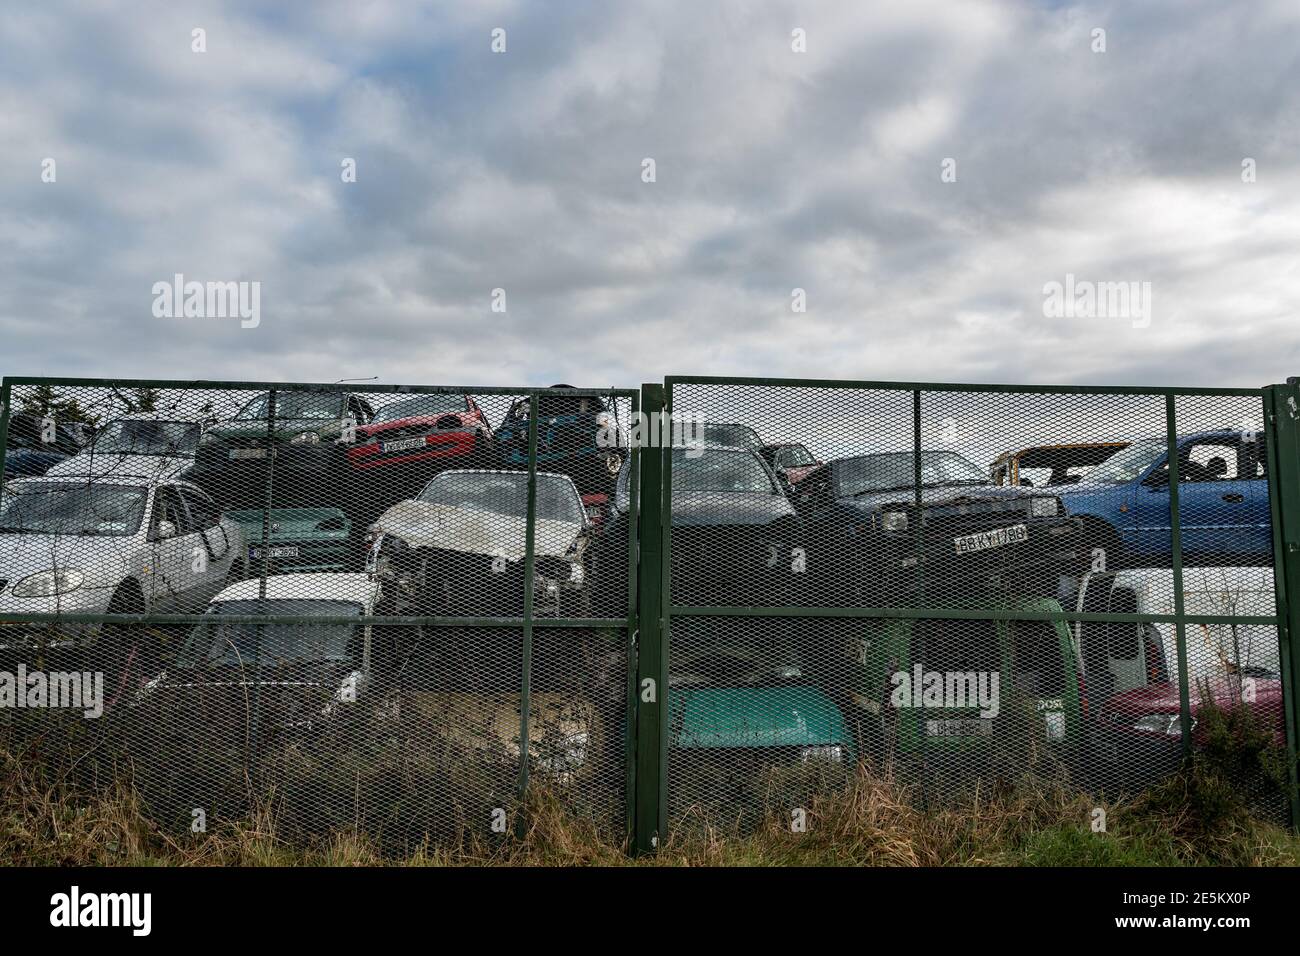 Listowel, Ireland - 7th January 2021: Pile of discarded old cars in a   junkyard. Stock Photo